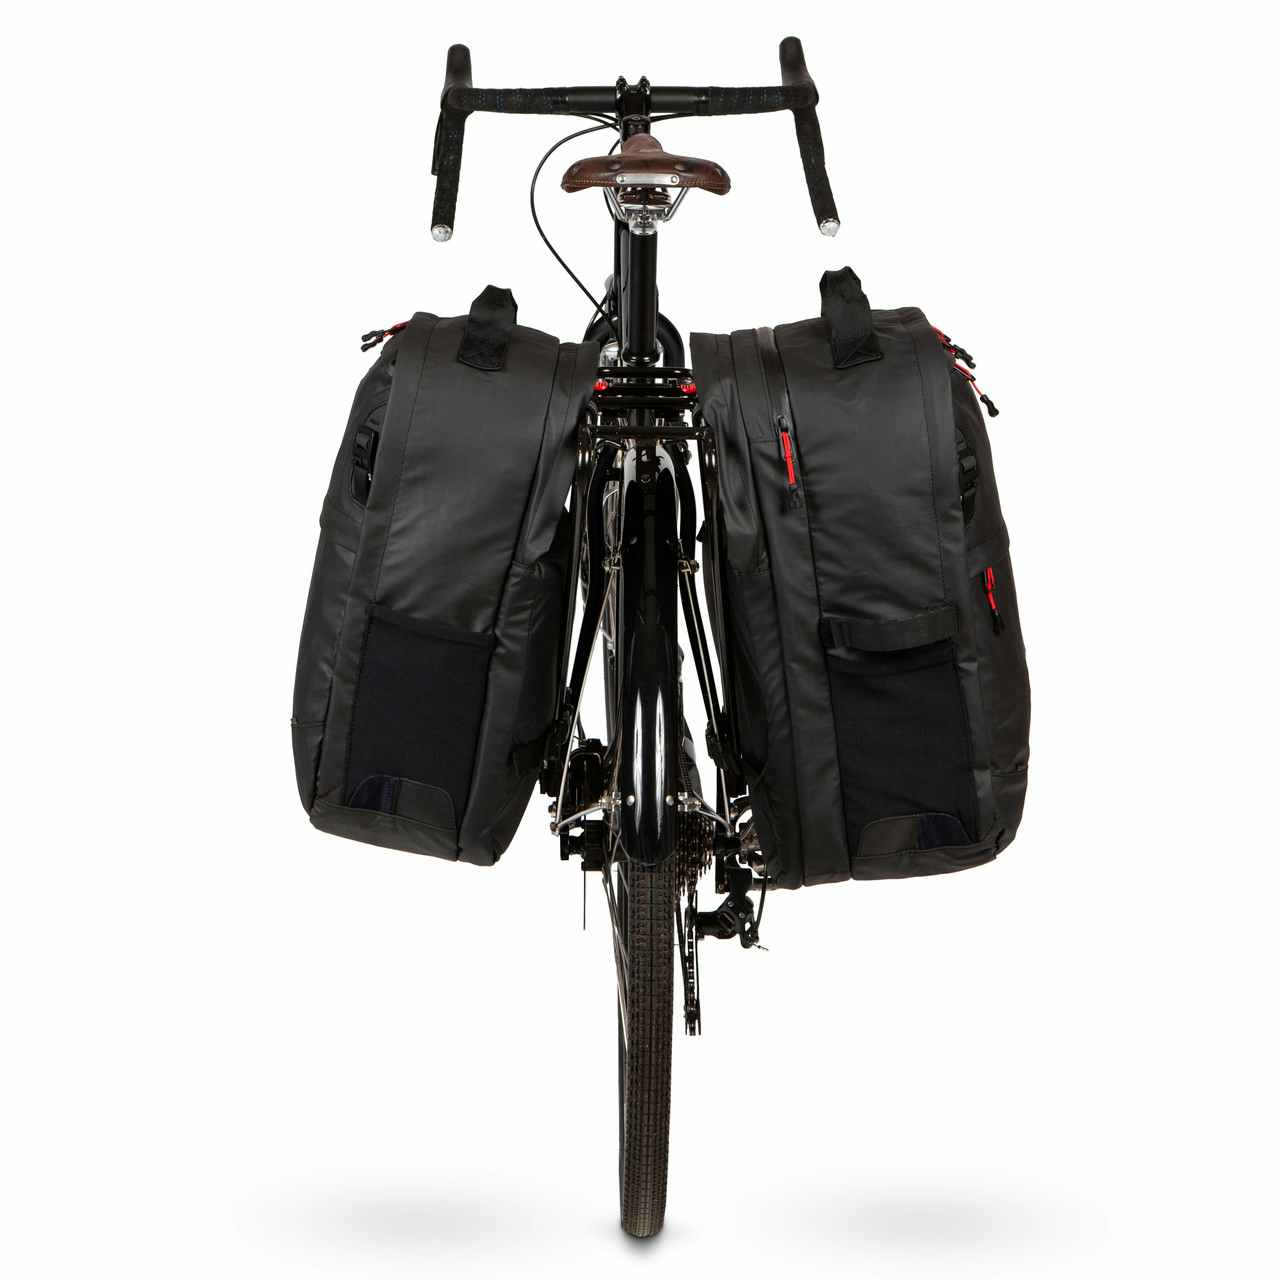 Pannier Backpack Convertible PLUS - Recycled Fabri Black